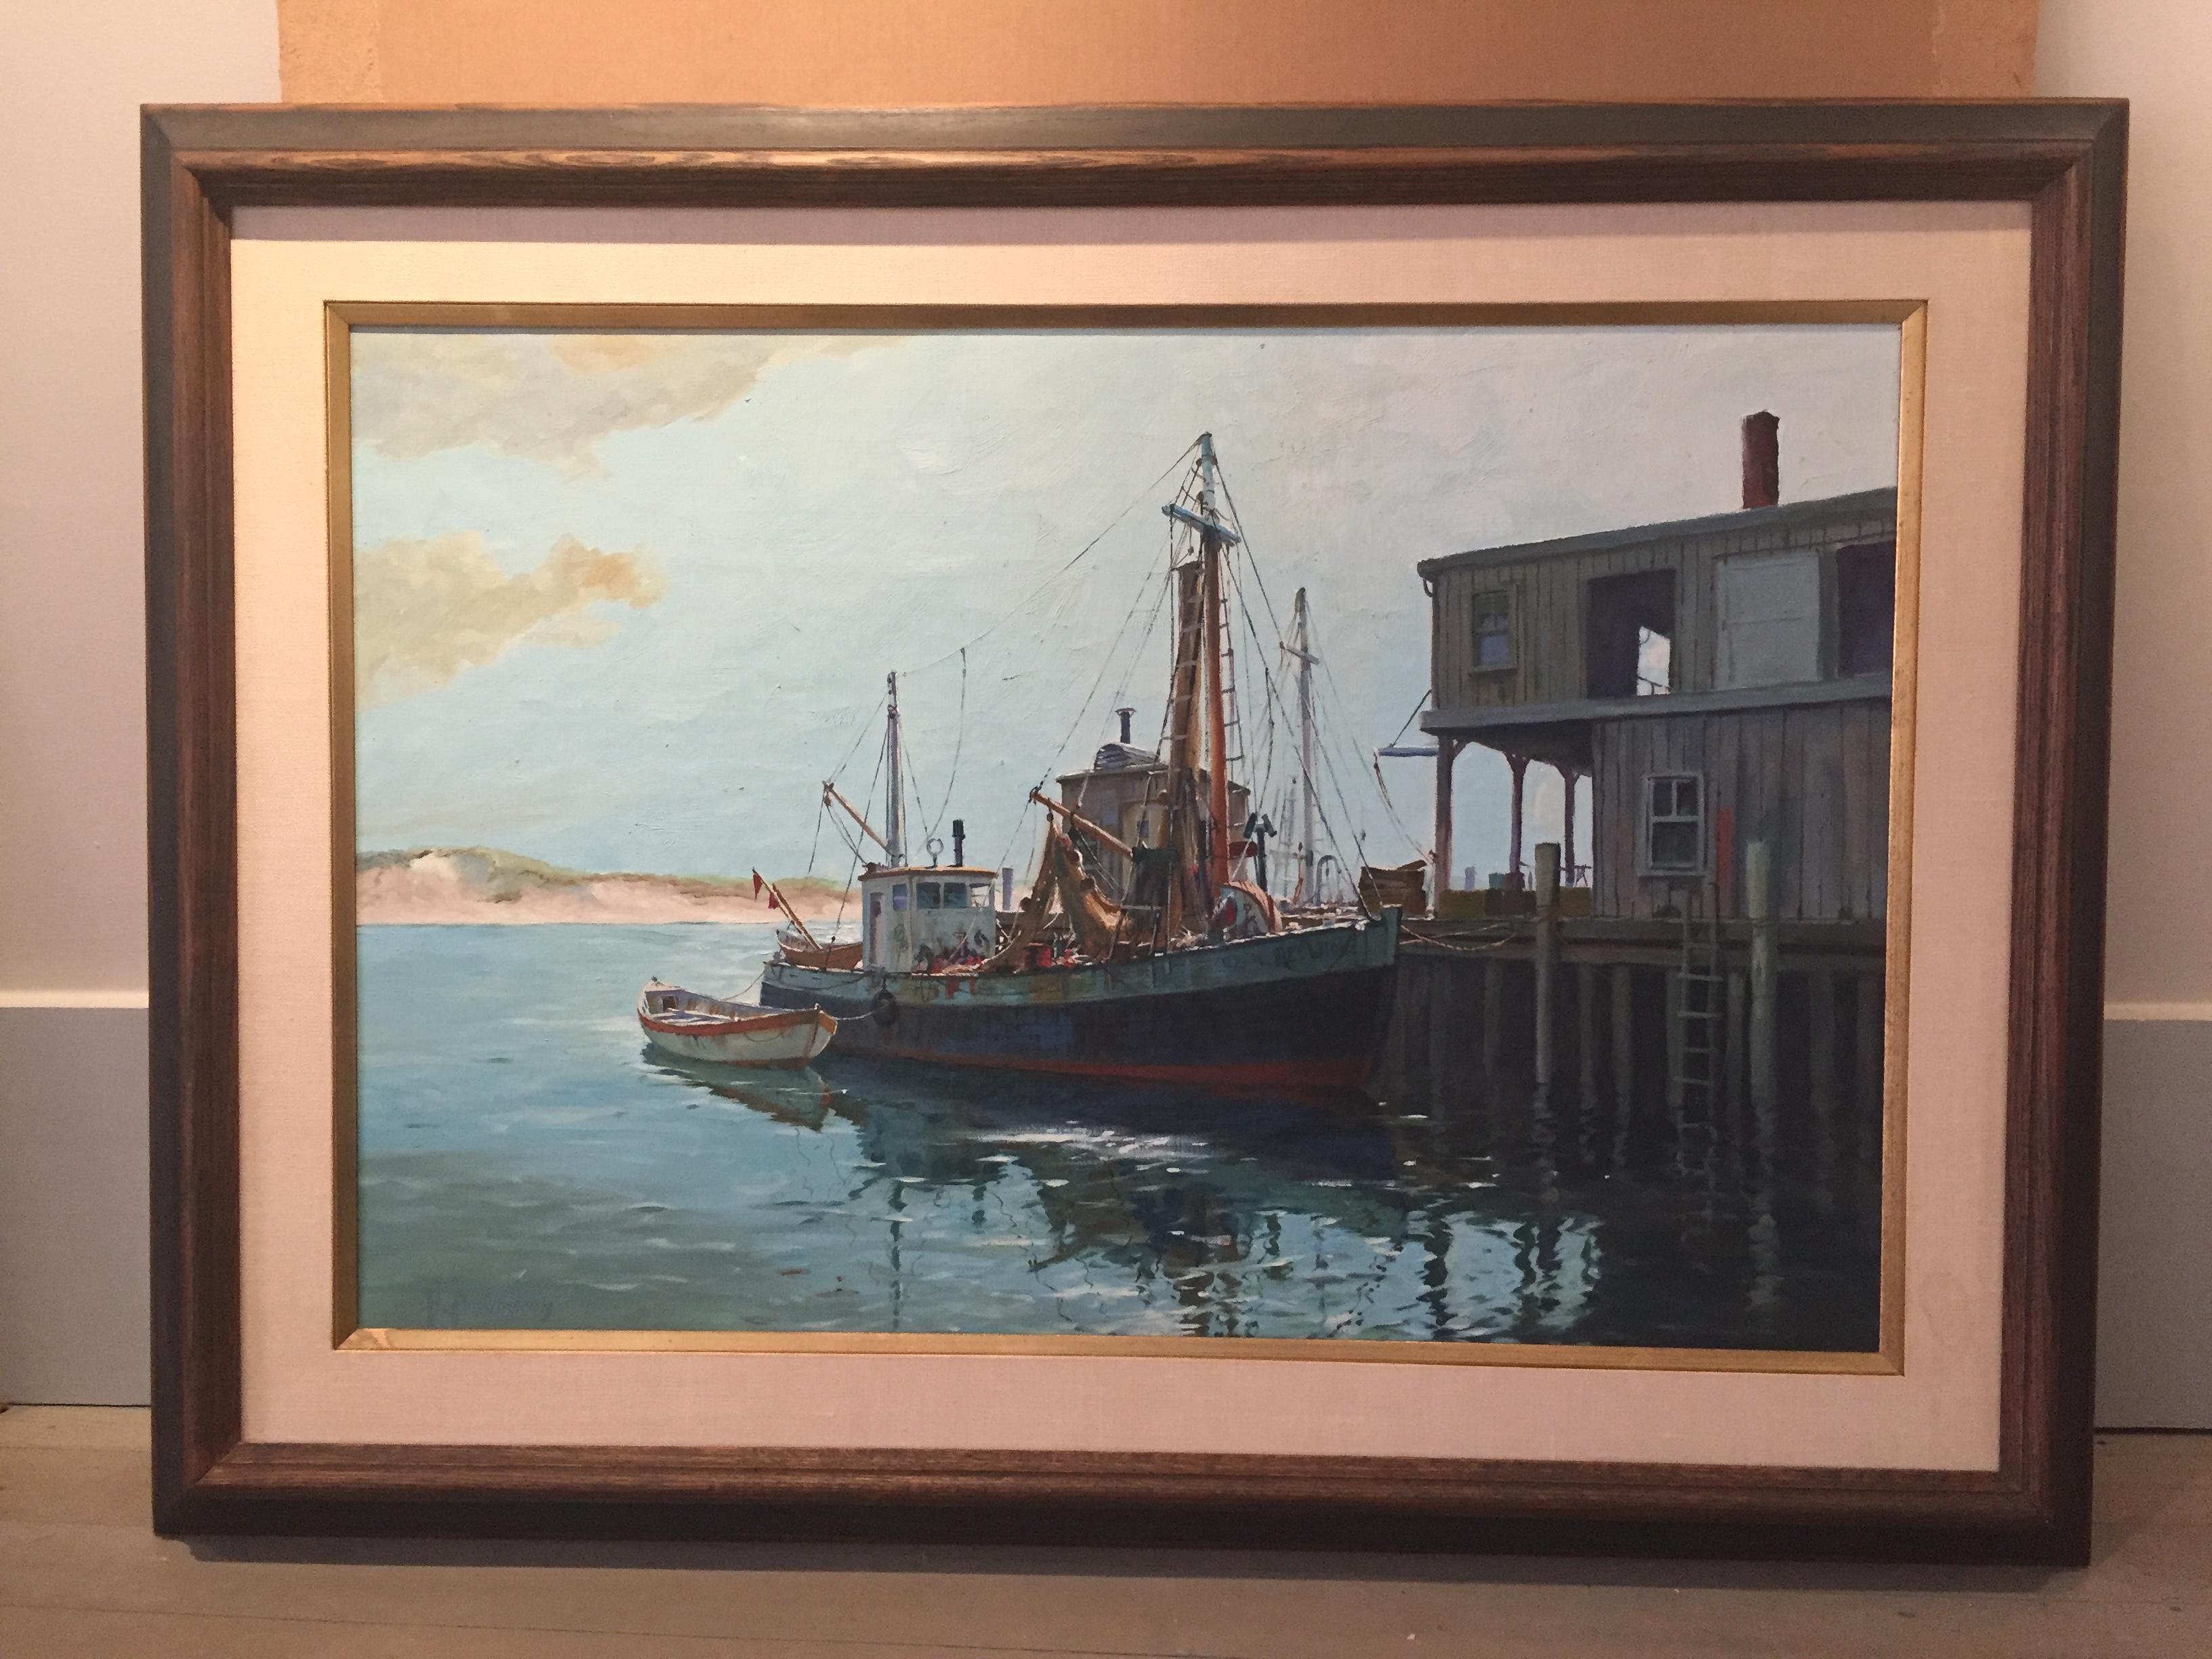 Gloucester Fishing Trawler - Painting by Cappy Amundsen